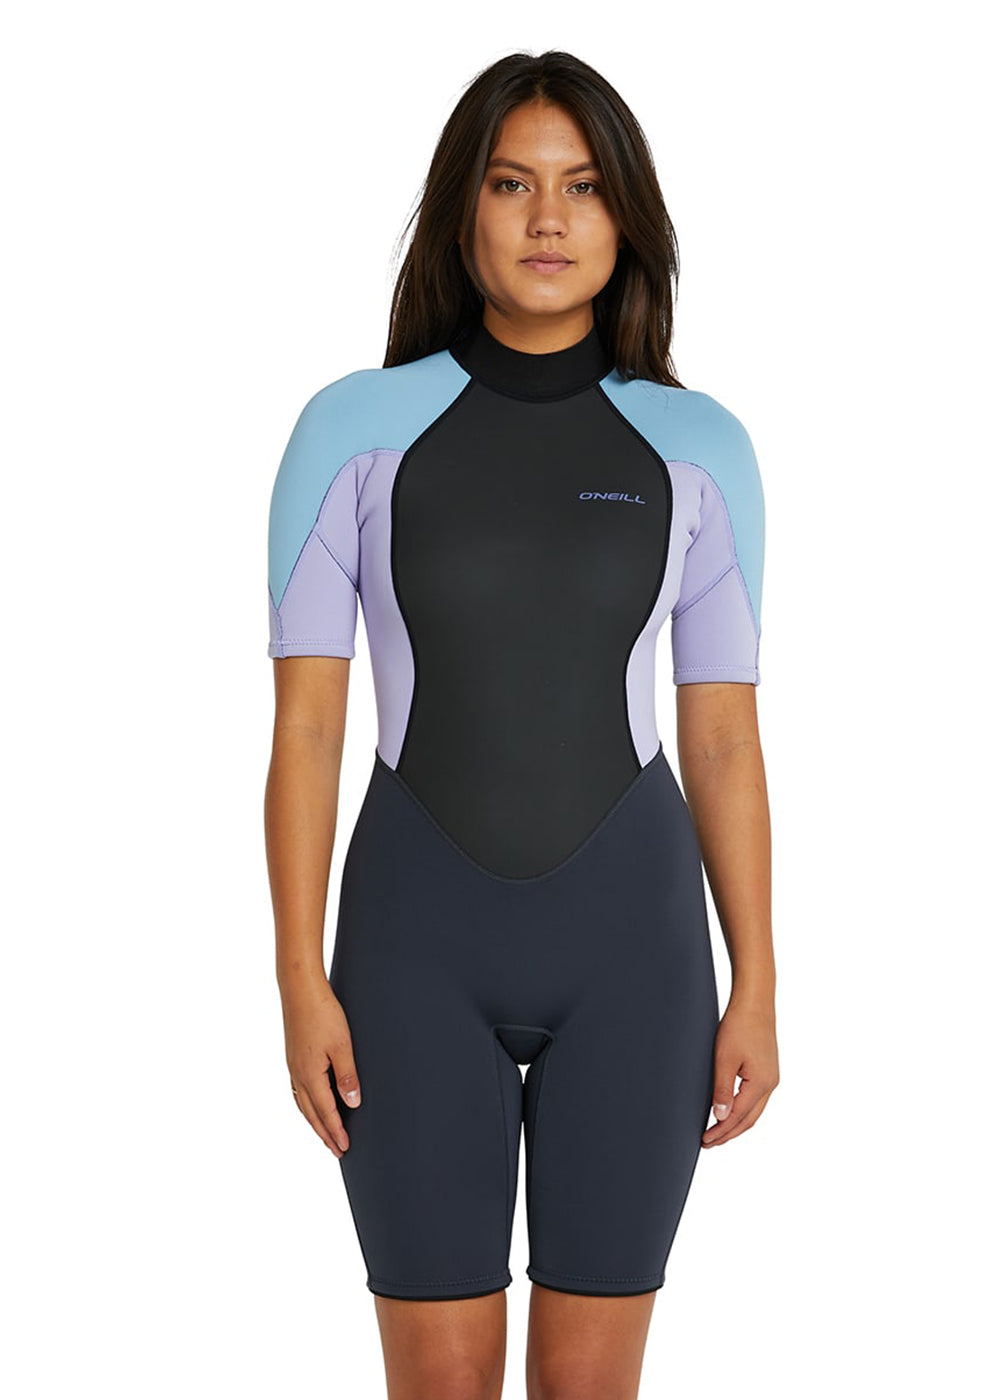 Women's Snorkelling Spring Suits